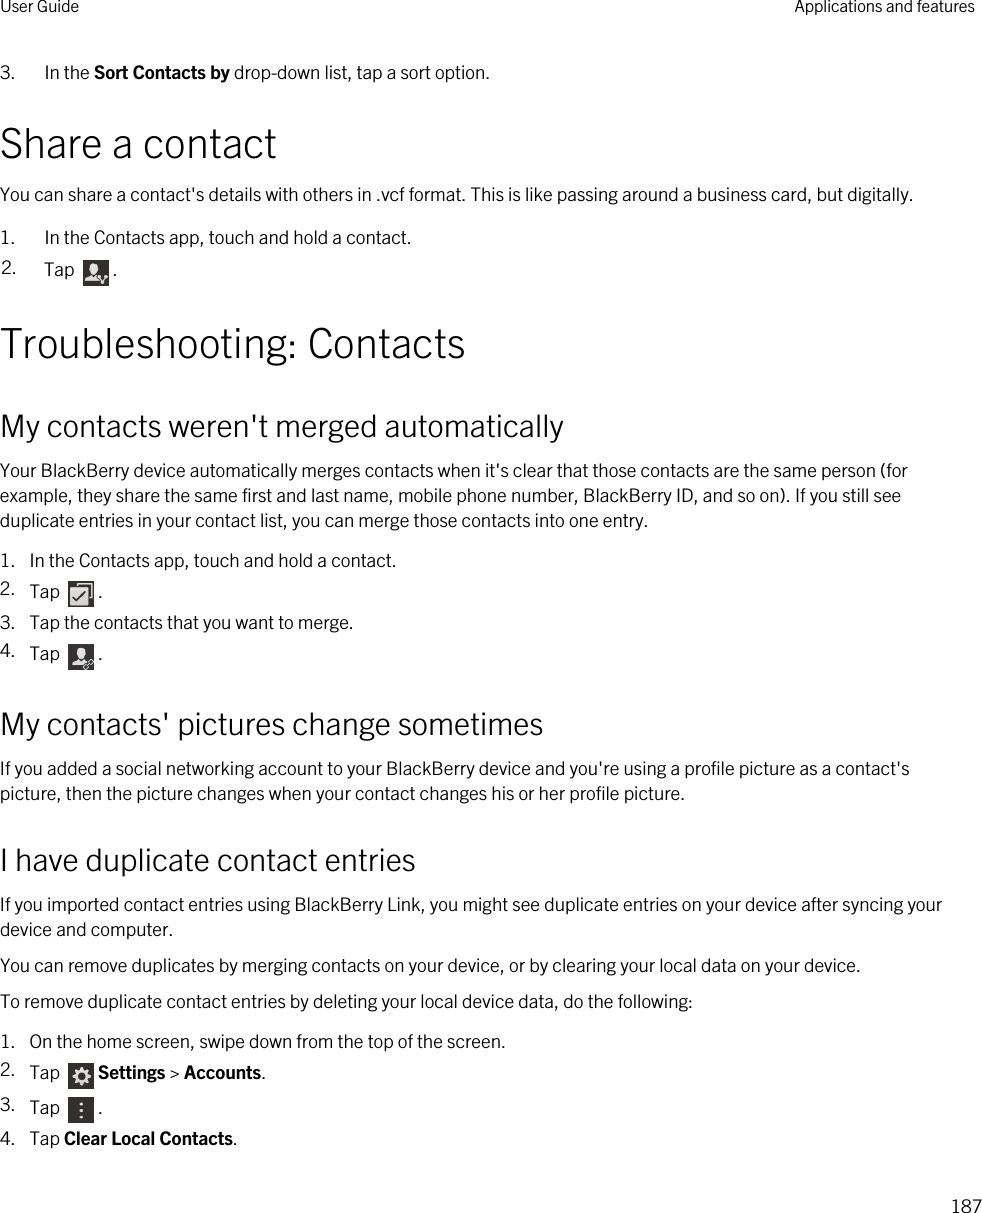 3. In the Sort Contacts by drop-down list, tap a sort option.Share a contactYou can share a contact&apos;s details with others in .vcf format. This is like passing around a business card, but digitally.1. In the Contacts app, touch and hold a contact.2. Tap  .Troubleshooting: ContactsMy contacts weren&apos;t merged automaticallyYour BlackBerry device automatically merges contacts when it&apos;s clear that those contacts are the same person (for example, they share the same first and last name, mobile phone number, BlackBerry ID, and so on). If you still see duplicate entries in your contact list, you can merge those contacts into one entry.1. In the Contacts app, touch and hold a contact.2. Tap  .3. Tap the contacts that you want to merge.4. Tap  .My contacts&apos; pictures change sometimesIf you added a social networking account to your BlackBerry device and you&apos;re using a profile picture as a contact&apos;s picture, then the picture changes when your contact changes his or her profile picture.I have duplicate contact entriesIf you imported contact entries using BlackBerry Link, you might see duplicate entries on your device after syncing your device and computer.You can remove duplicates by merging contacts on your device, or by clearing your local data on your device.To remove duplicate contact entries by deleting your local device data, do the following:1. On the home screen, swipe down from the top of the screen.2. Tap  Settings &gt; Accounts.3. Tap  .4. Tap Clear Local Contacts.User Guide Applications and features187